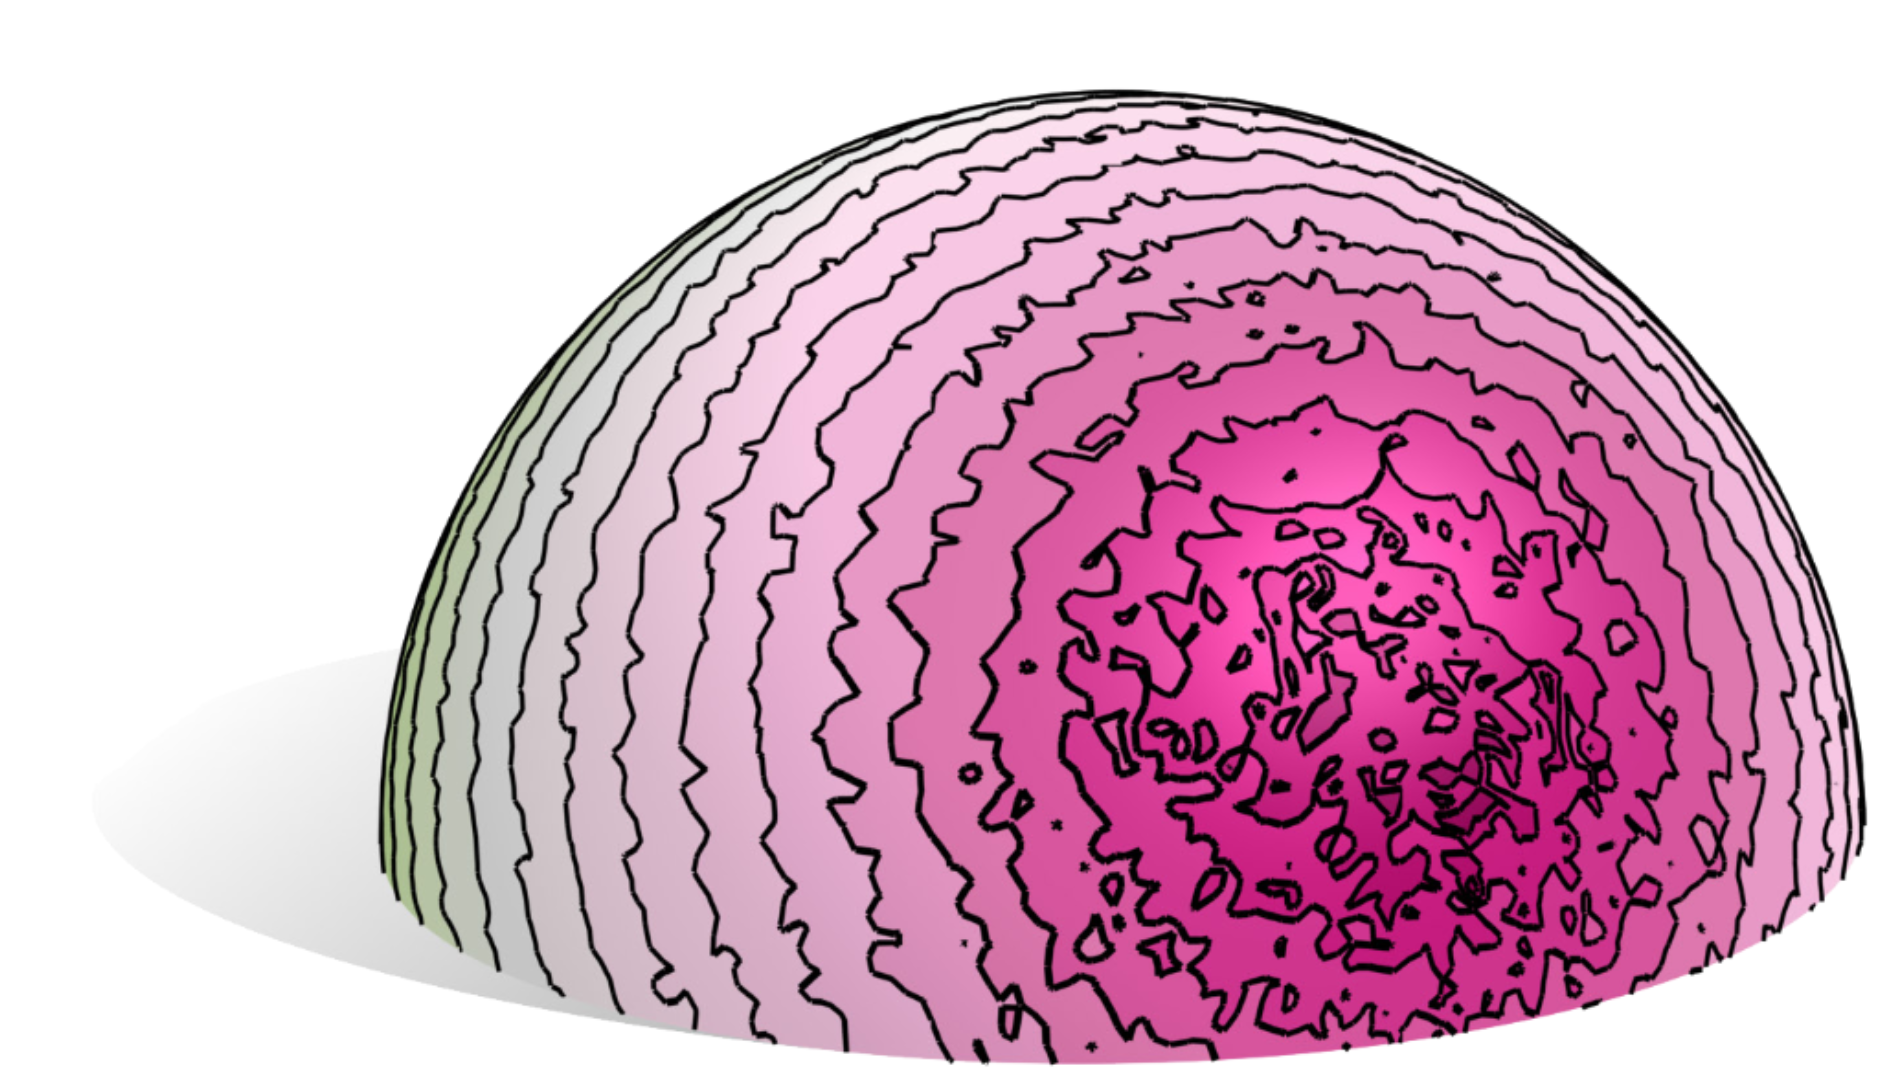 Image courtesy of: Oden stein and al Natural Boundary Conditions for Smoothing in Geometry Processing